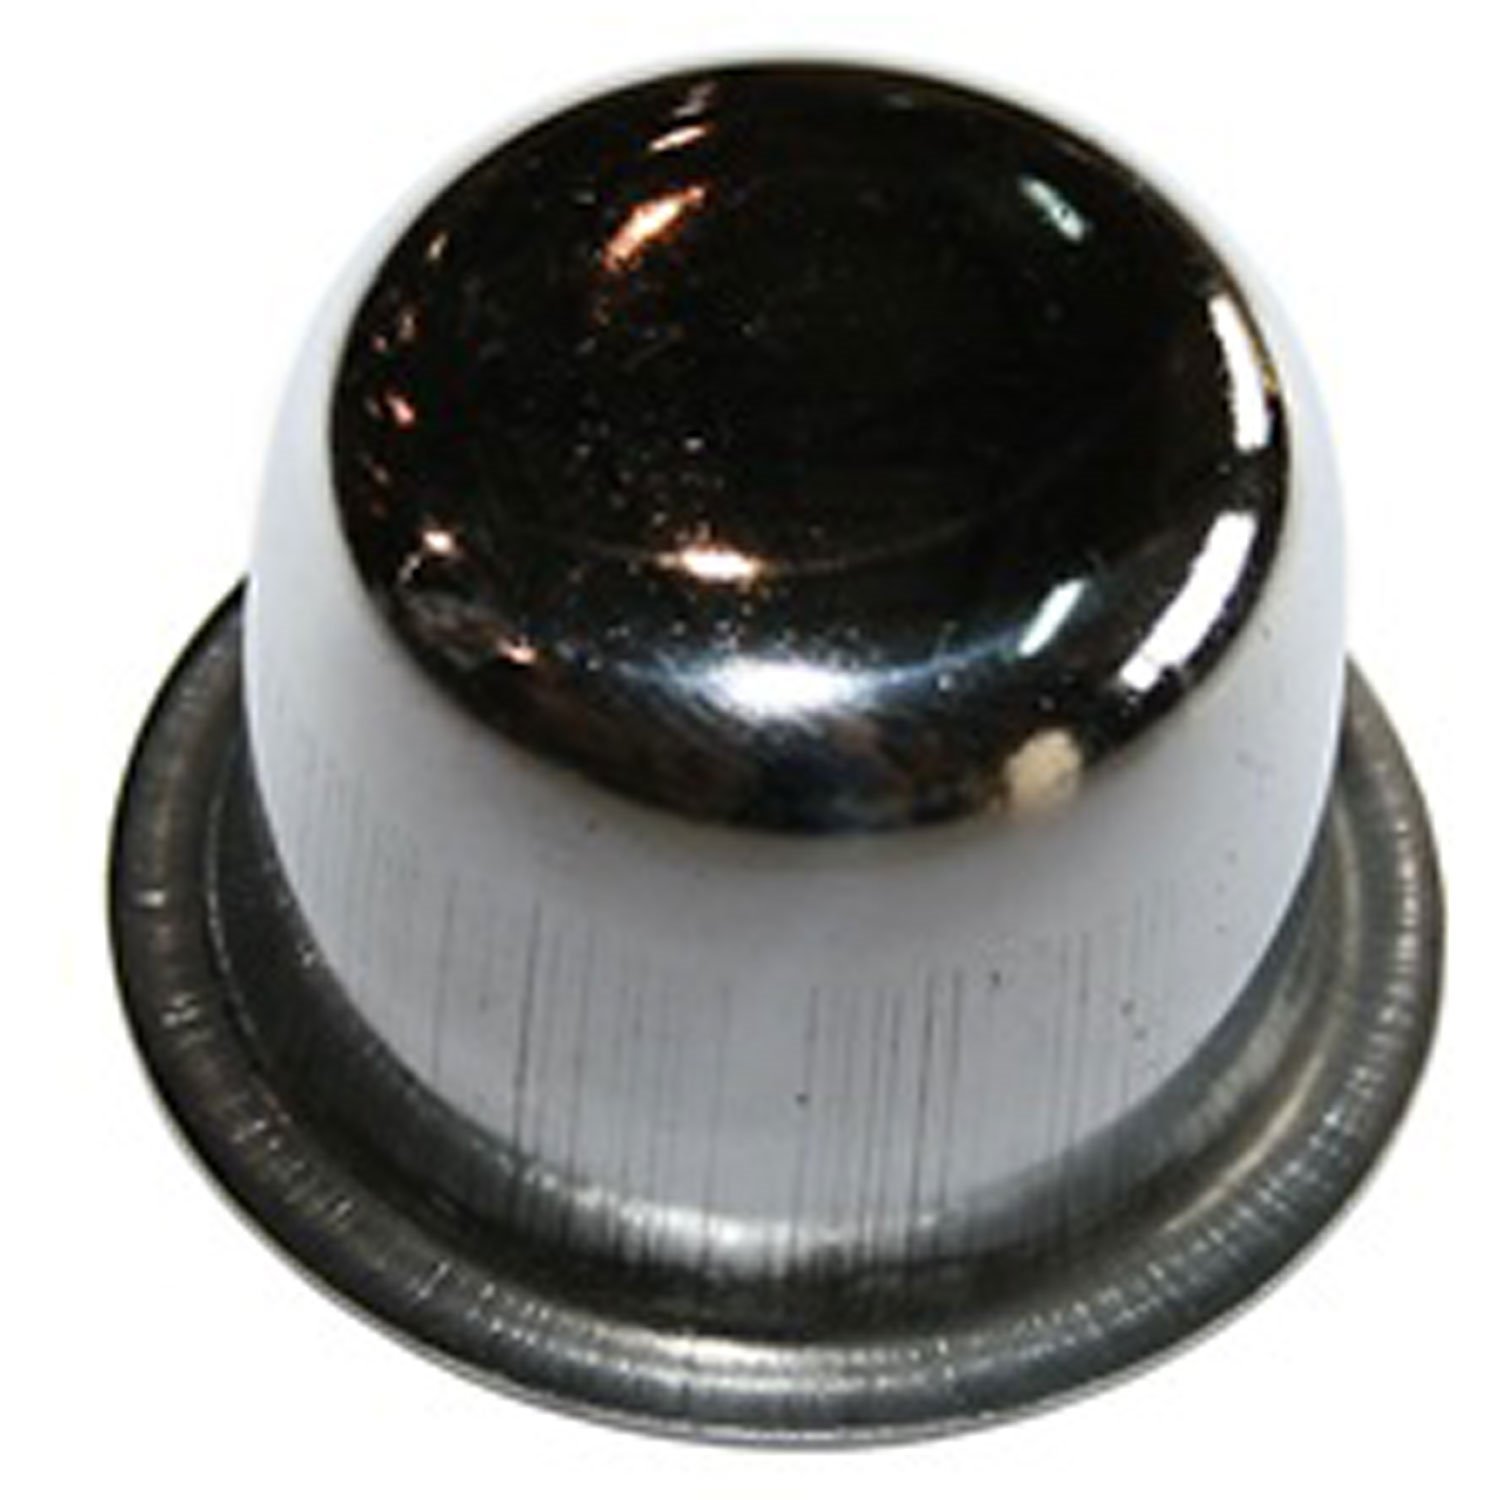 This metal axle hub dust cap from Omix-ADA fits the AMC 20 rear axle found in 76-86 Jeep CJ models.